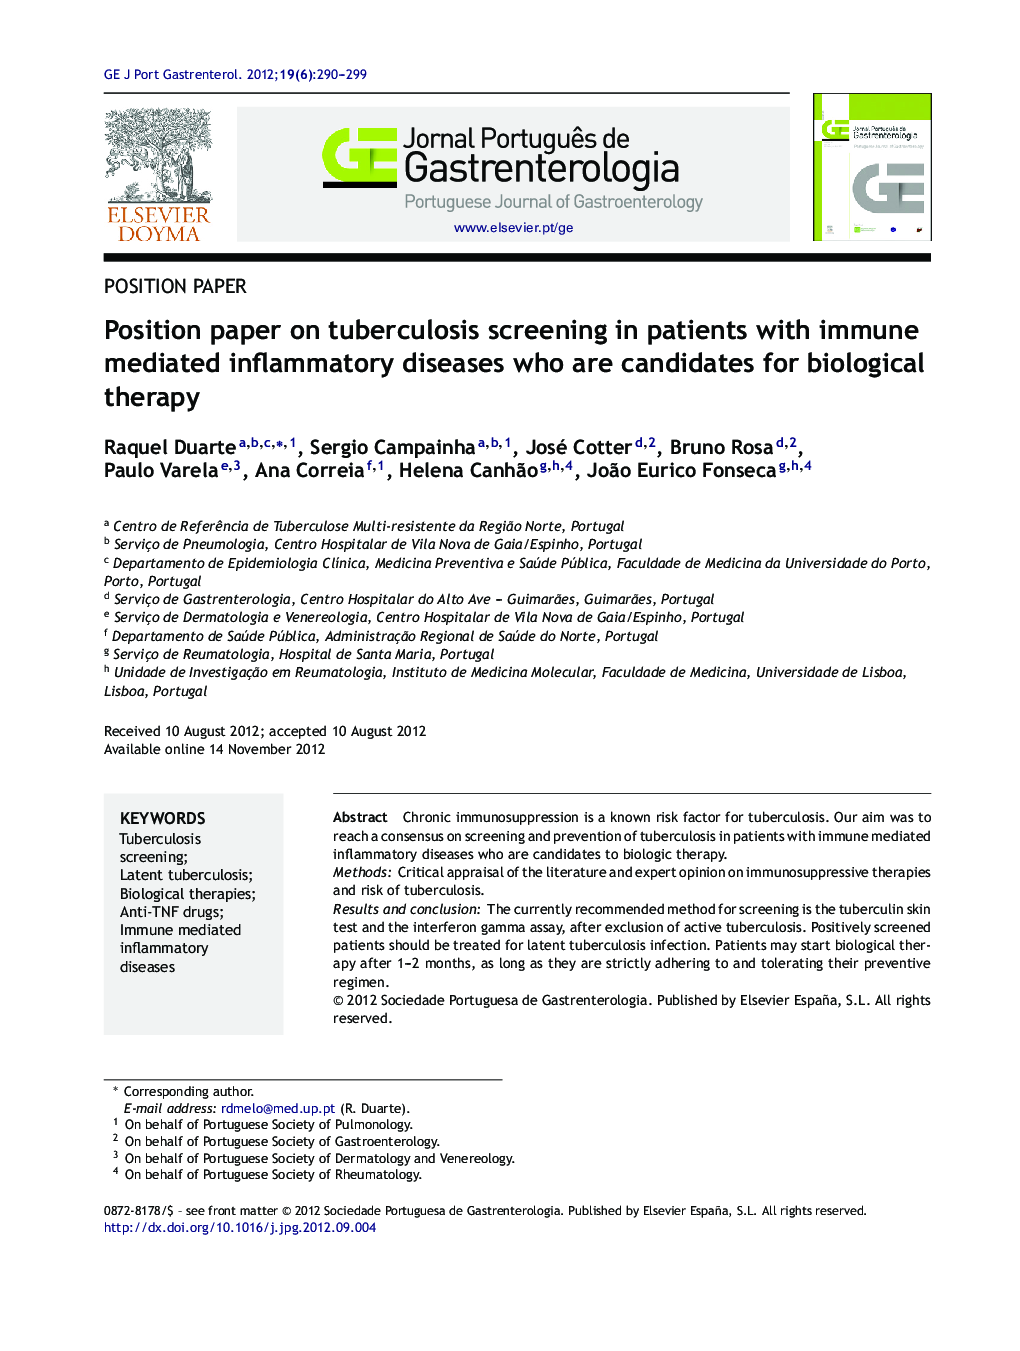 Position paper on tuberculosis screening in patients with immune mediated inflammatory diseases who are candidates for biological therapy